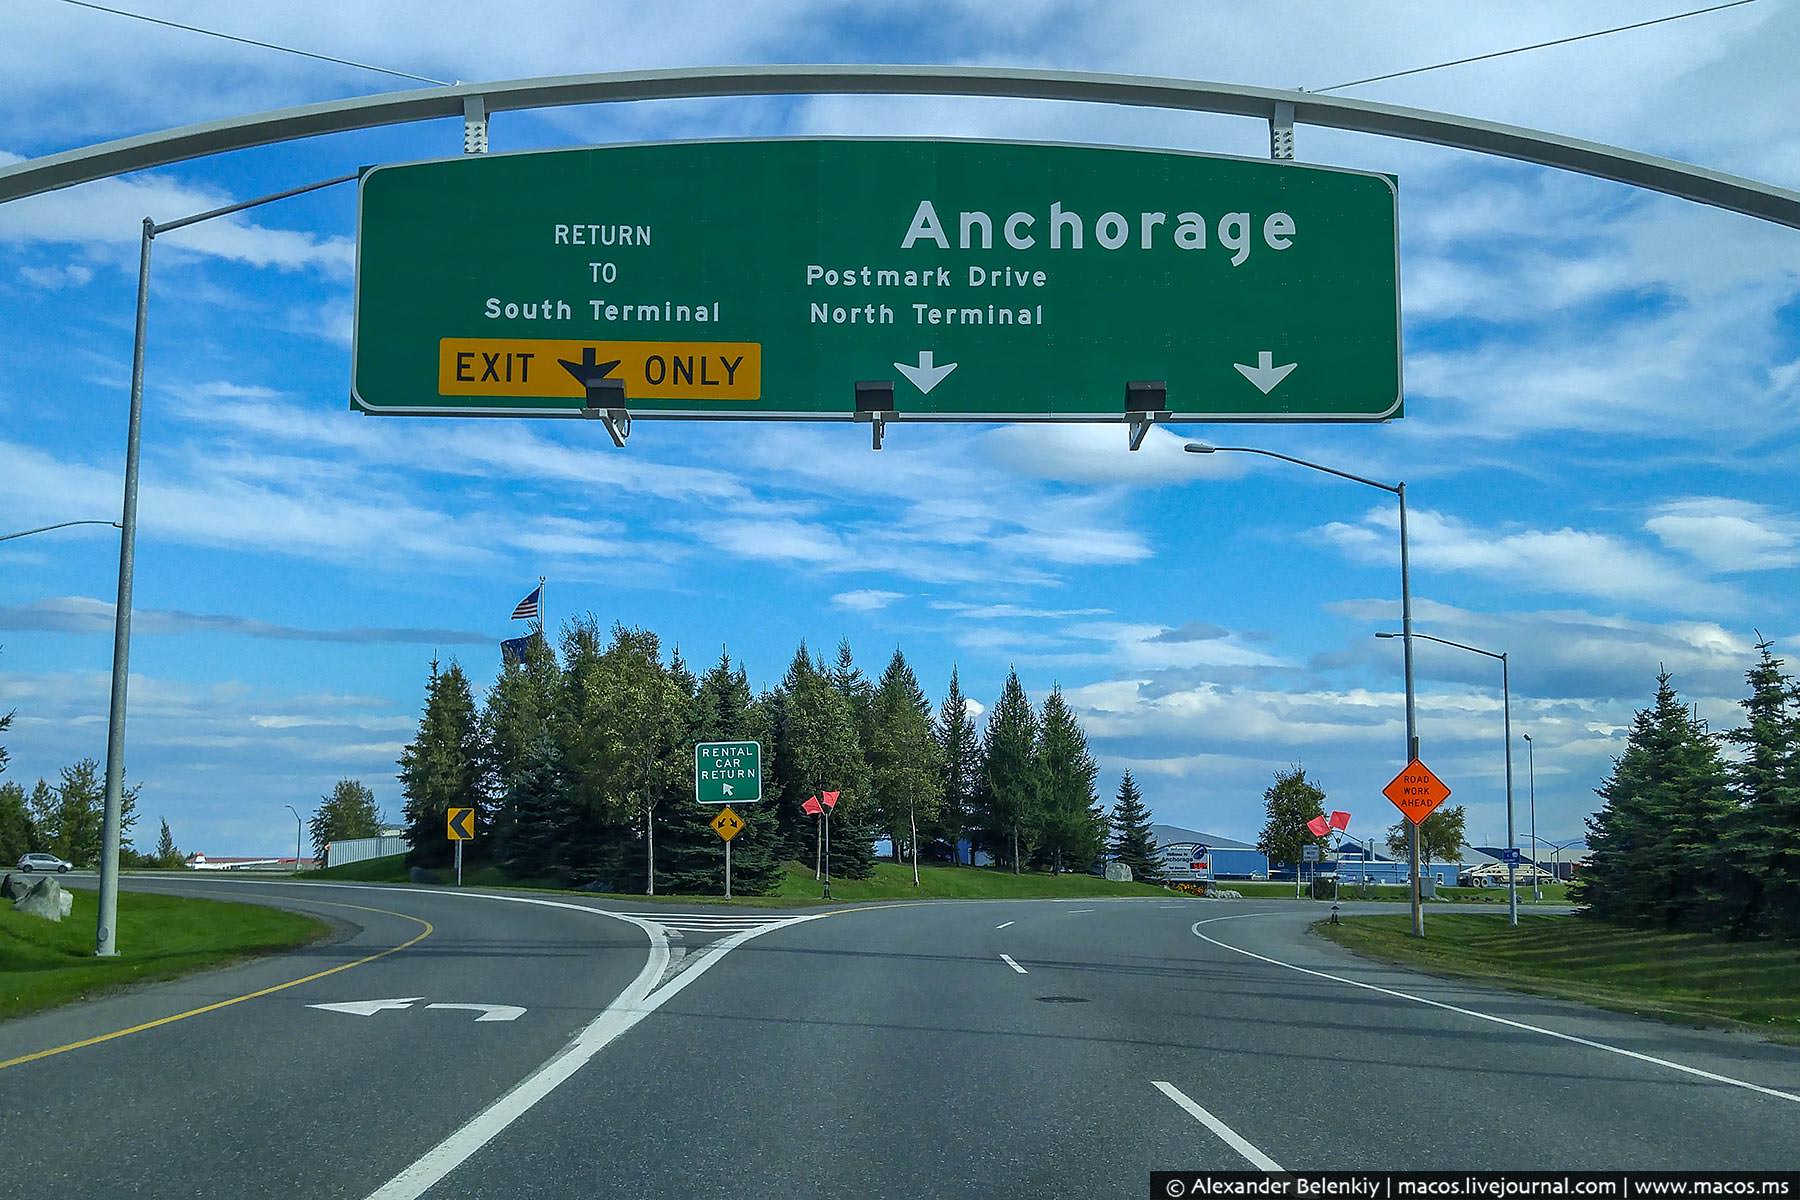 Anchorage only fans